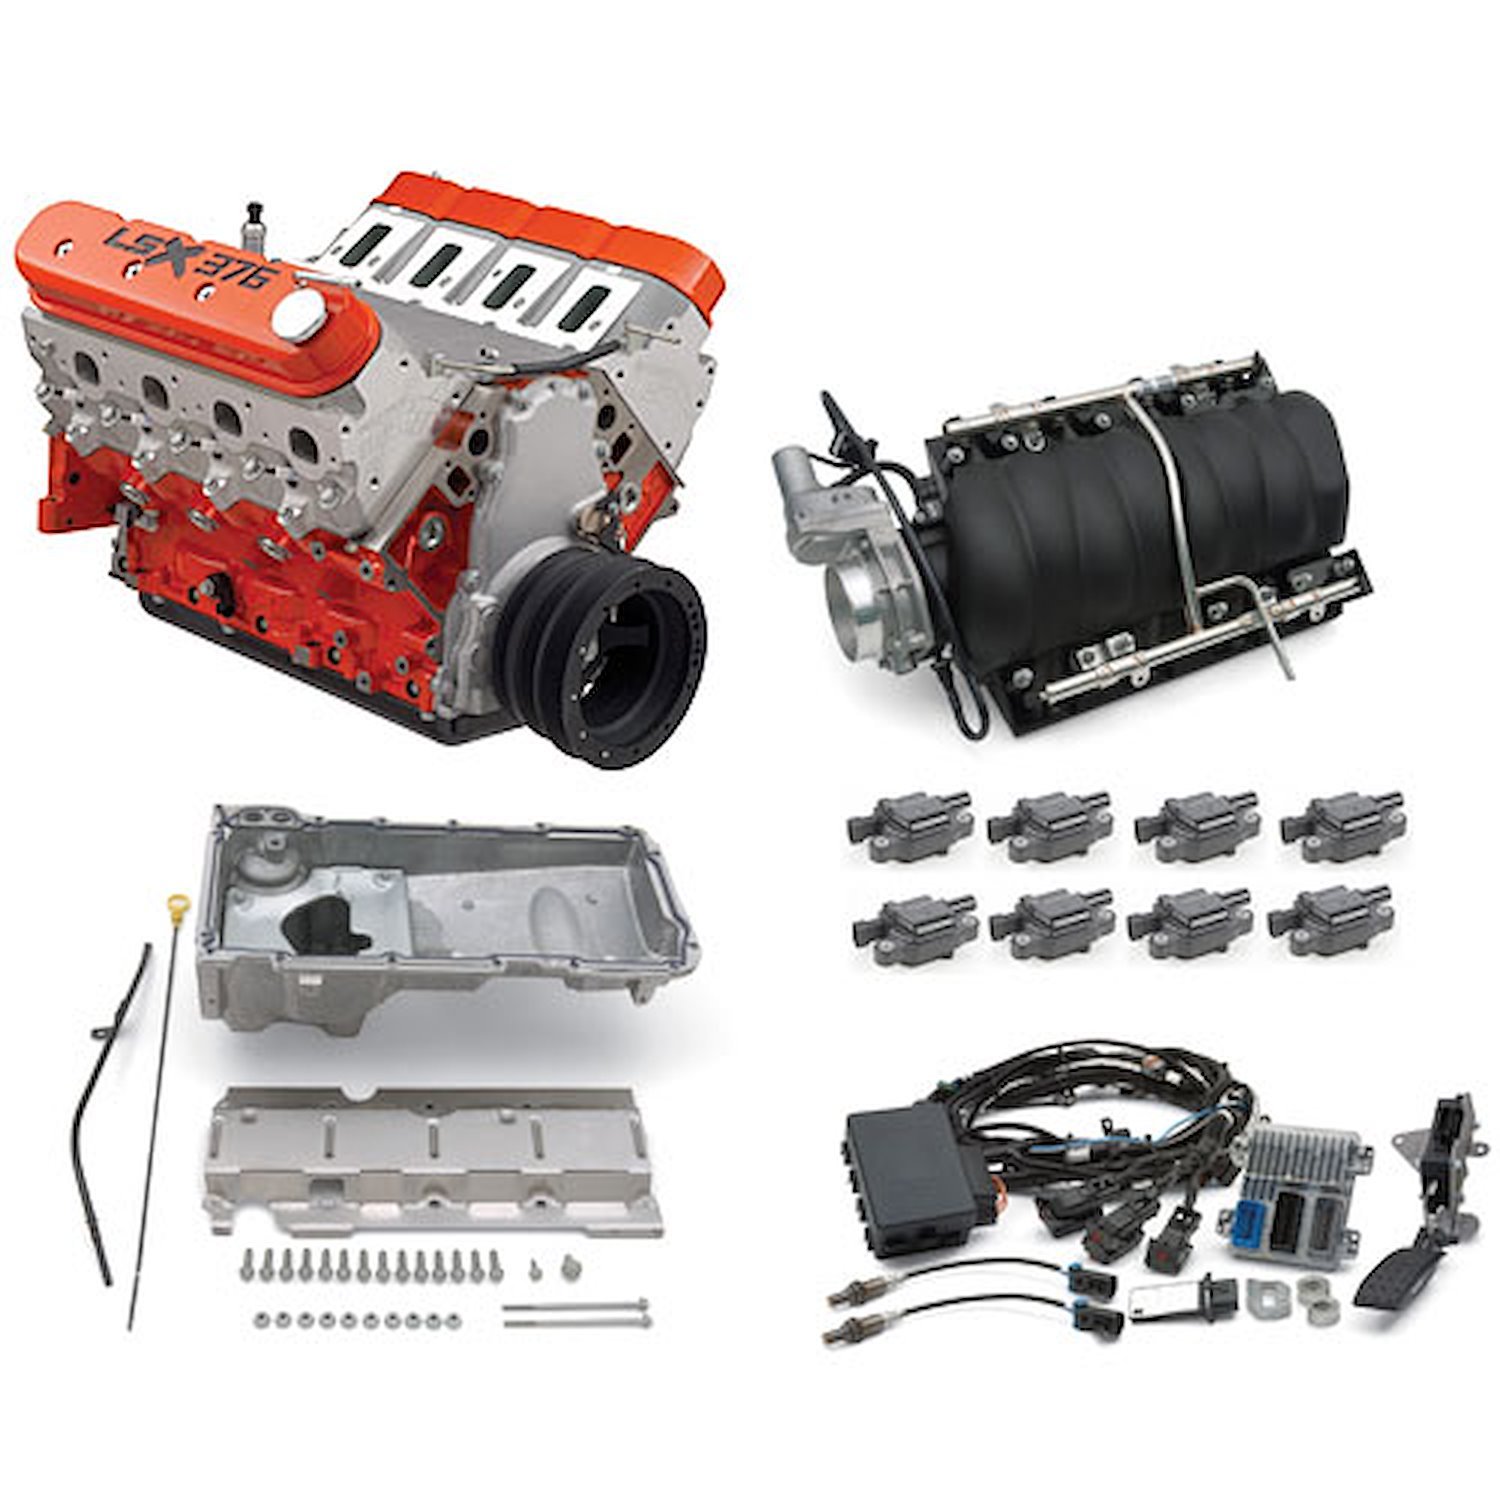 19417356 LSX376-B15 376ci Crate Engine Kit [Fuel-Injected]